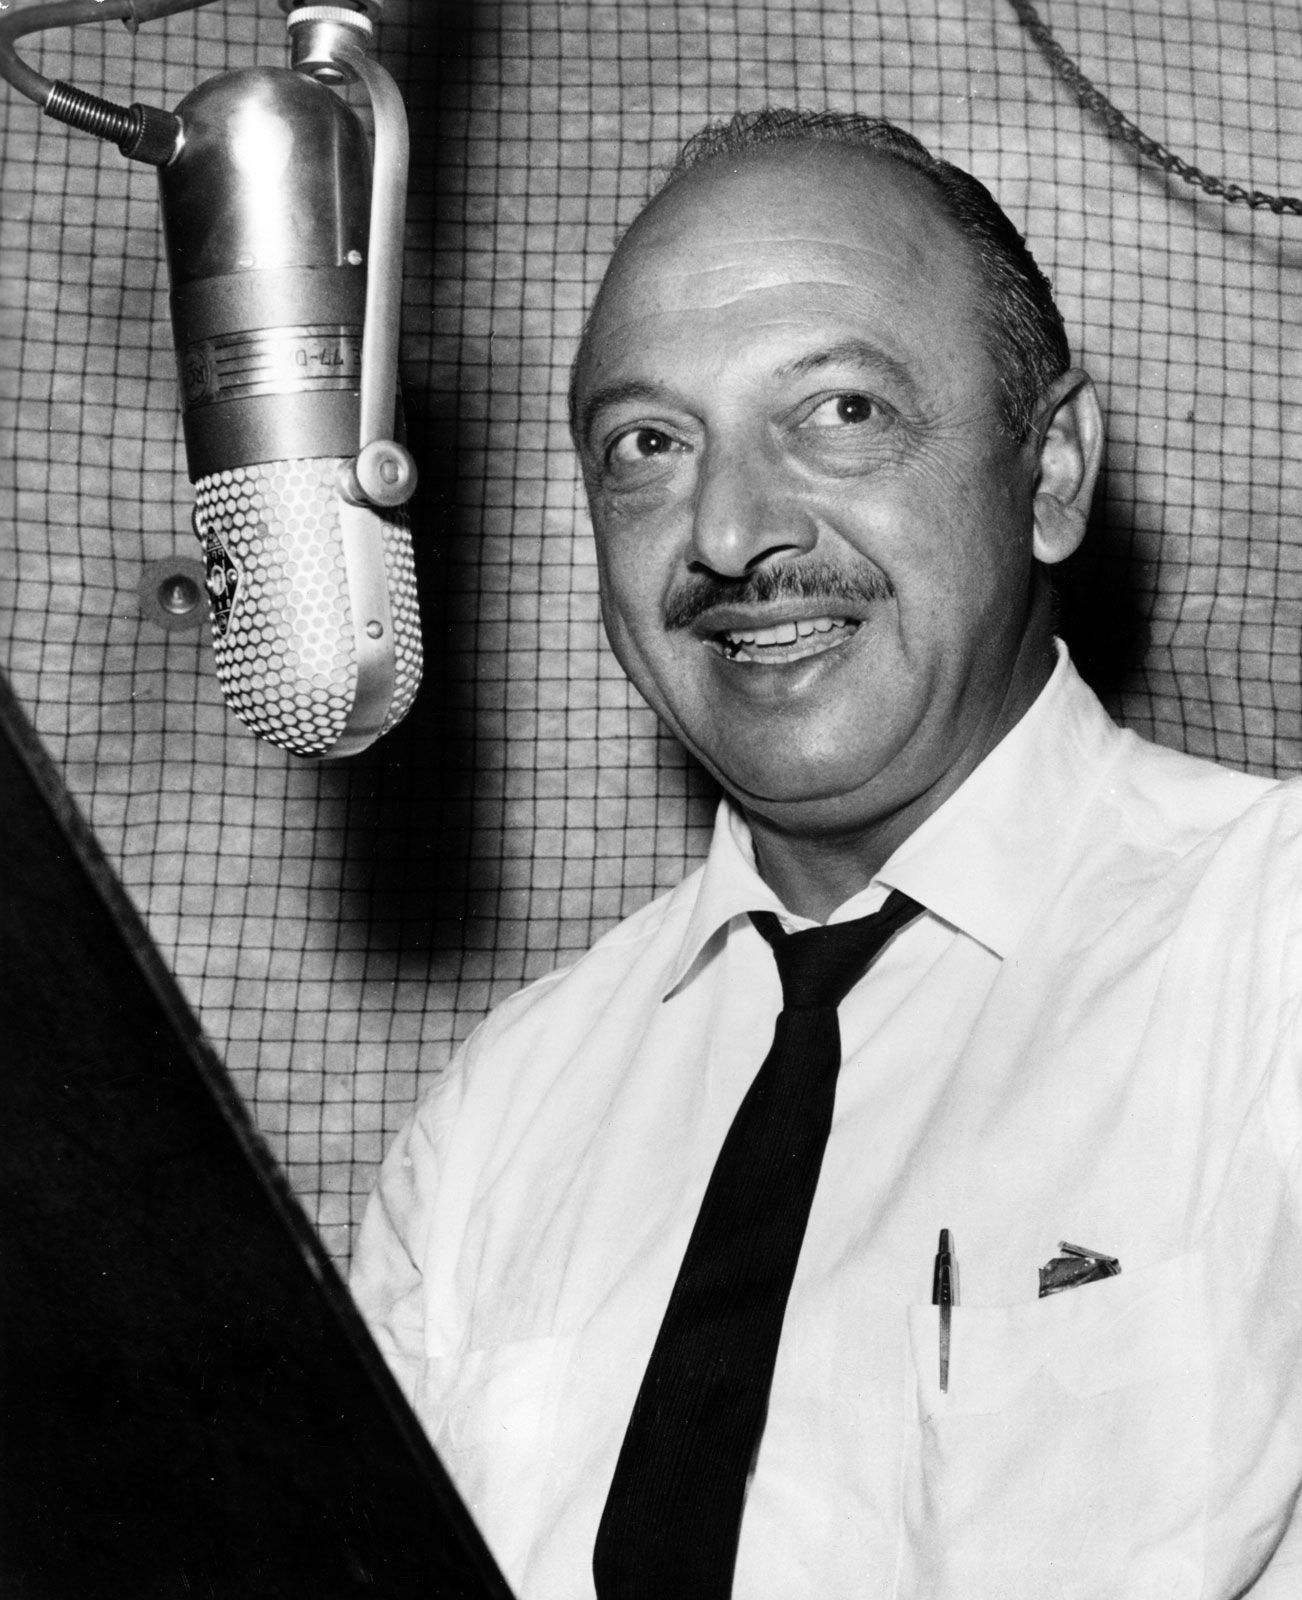 Mel Blanc in the recording studio speaking into a microphone.